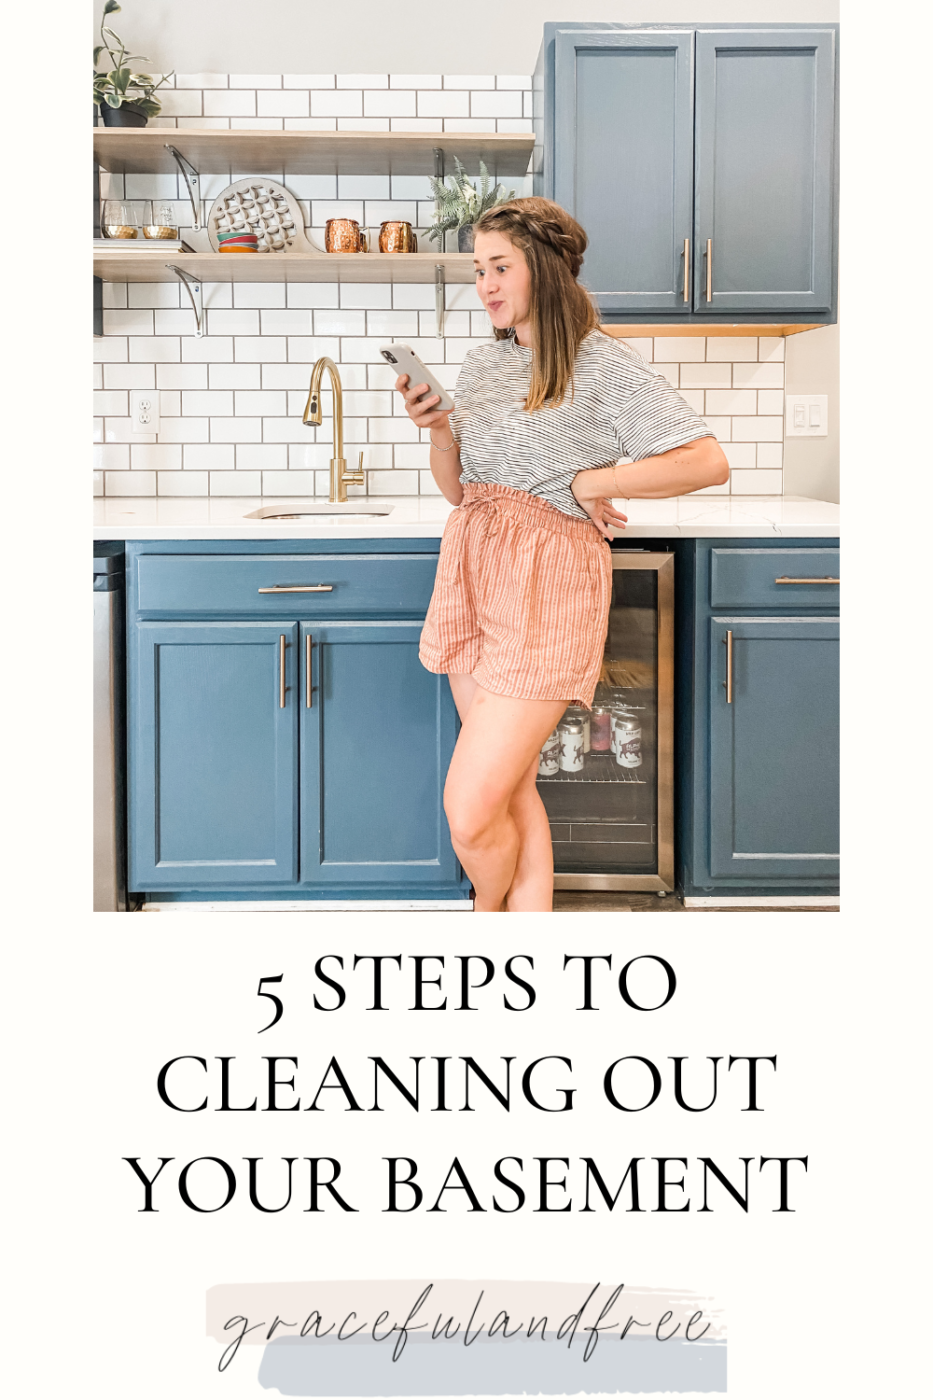 5 steps to cleaning out your basement